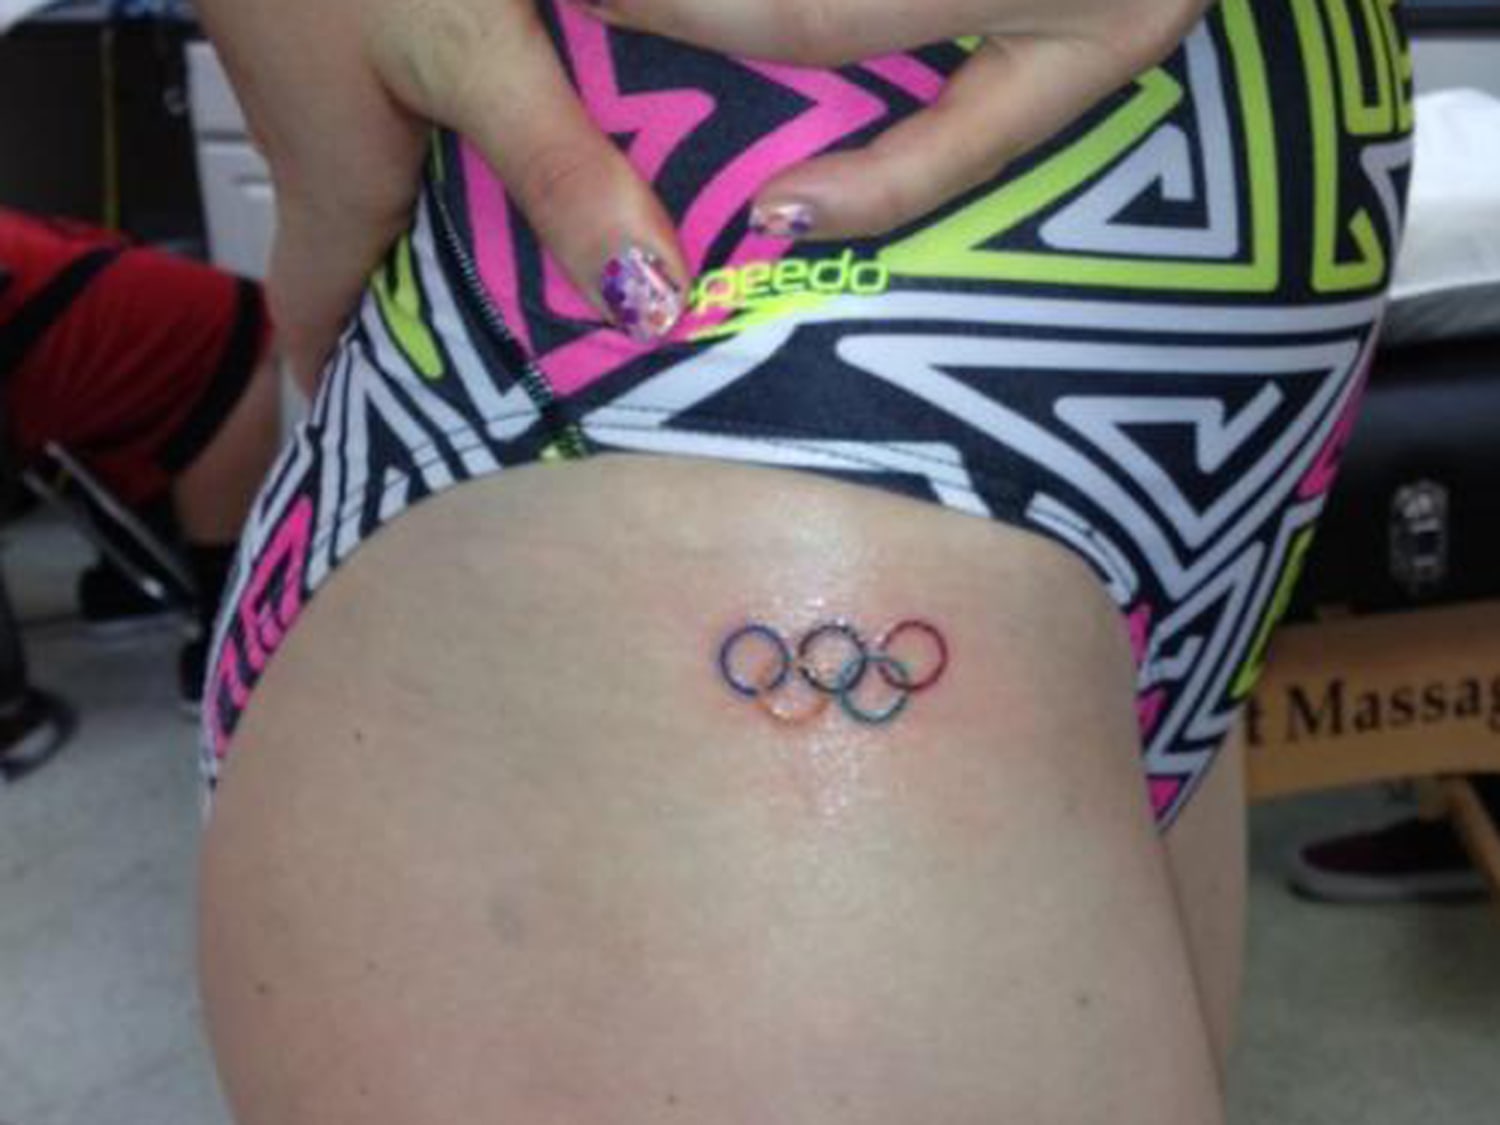 The Best Olympics Rings Tattoos At London 2012 | Balls.ie